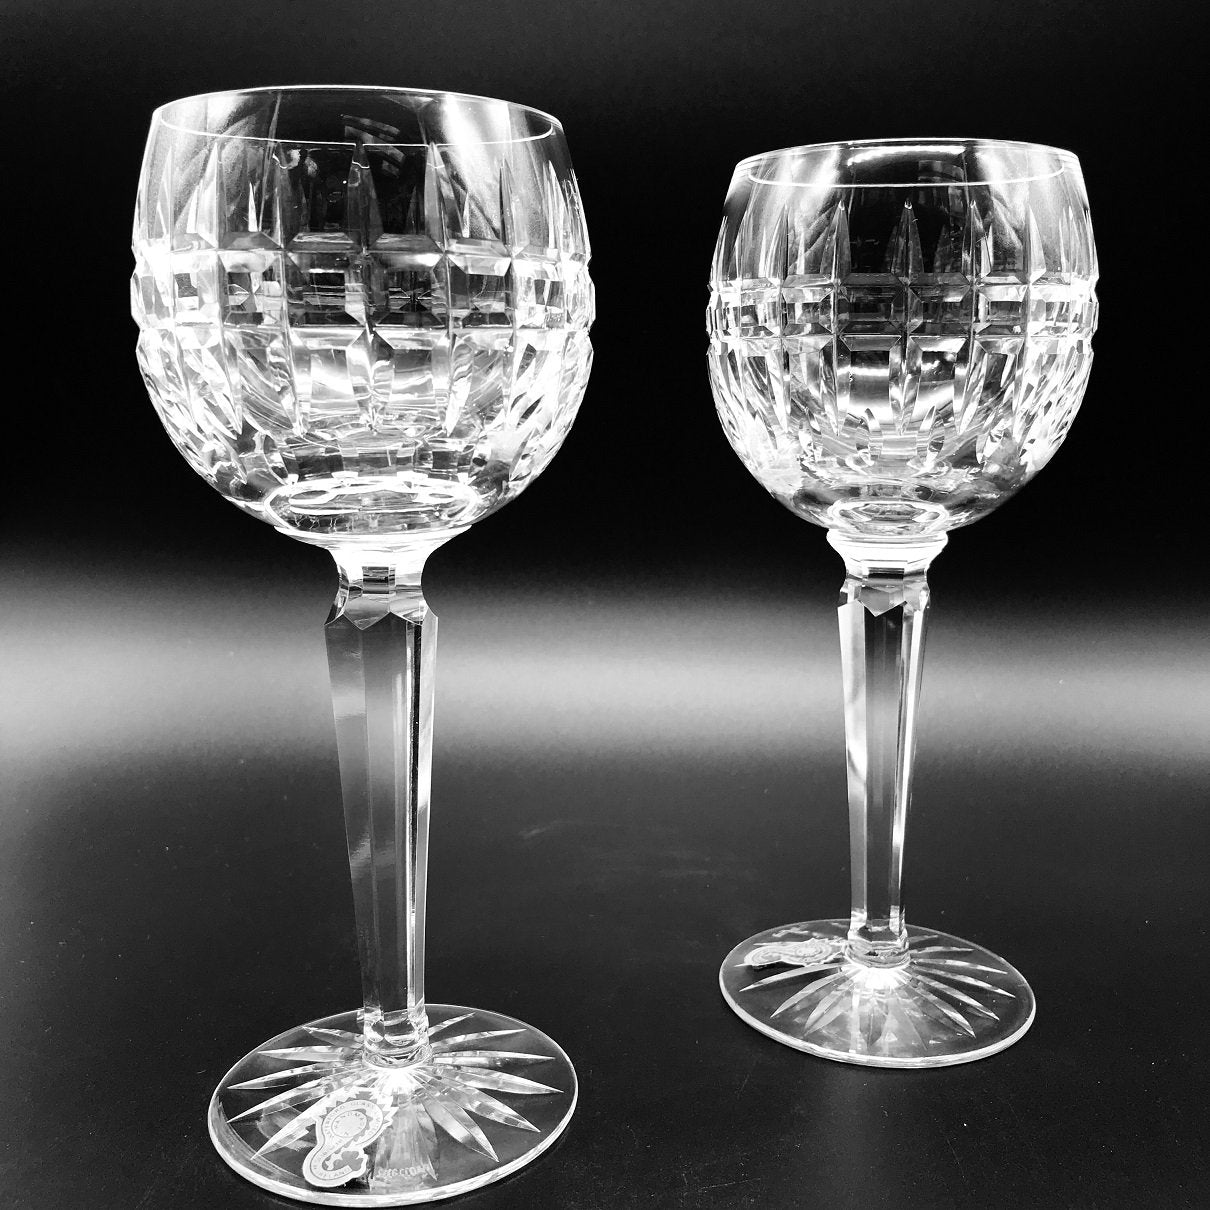 Waterford Crystal Glenmore Hock Pair  The Waterford Glenmore pattern is a stunning combination of brilliance and clarity.